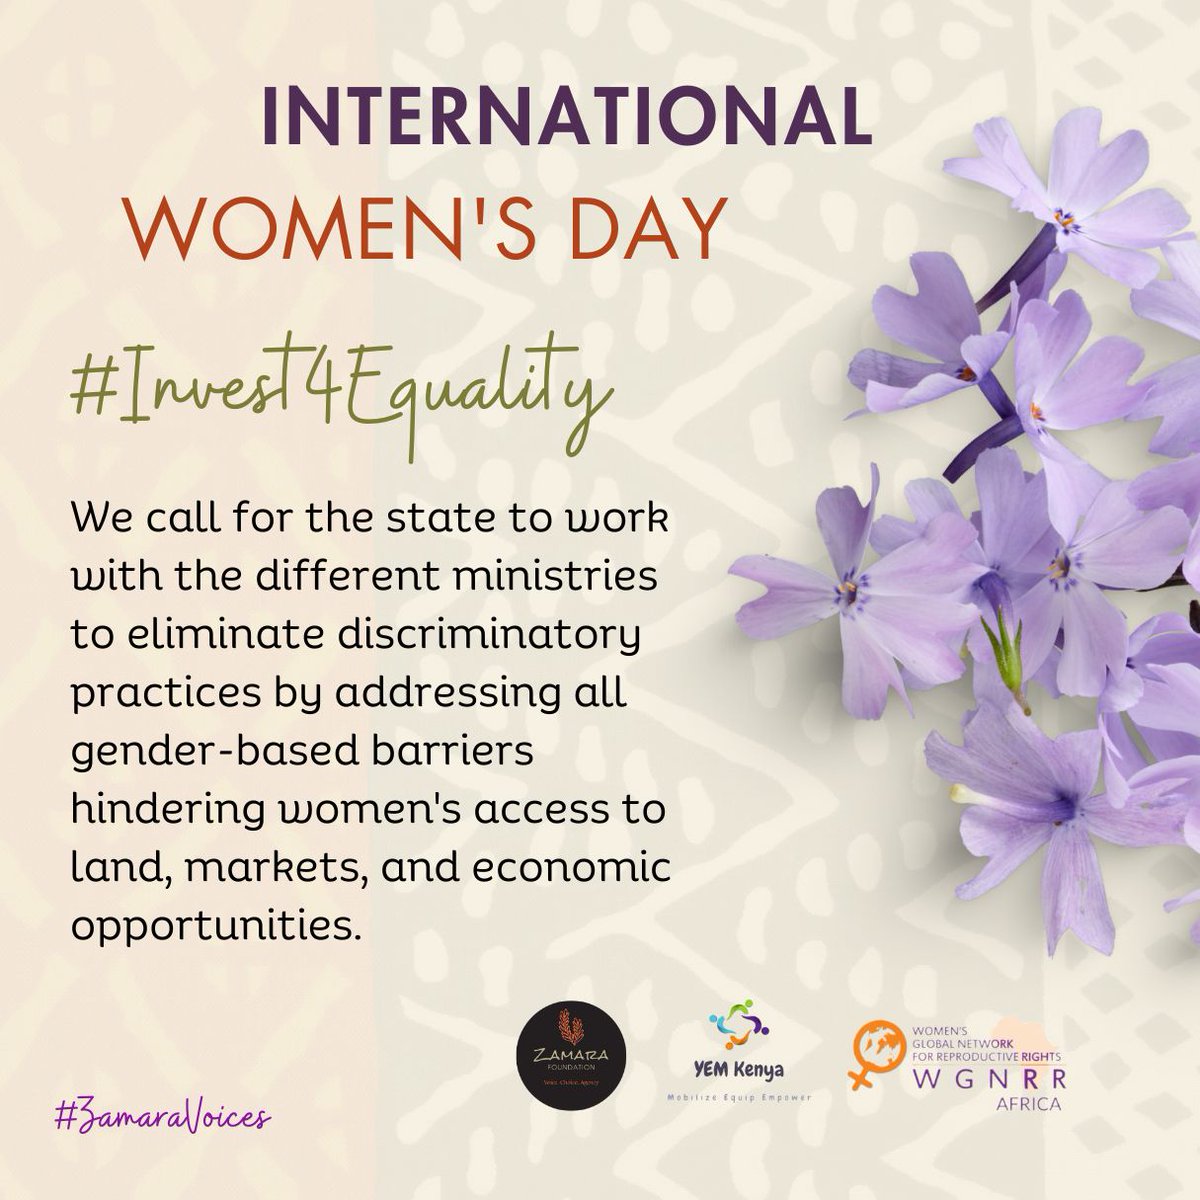 This is a call to Government to work in collaboration with other ministries to eliminate discriminatory practices that affect women & girls in all their diversity.
#Invest4Equality
#ZamaraVoices